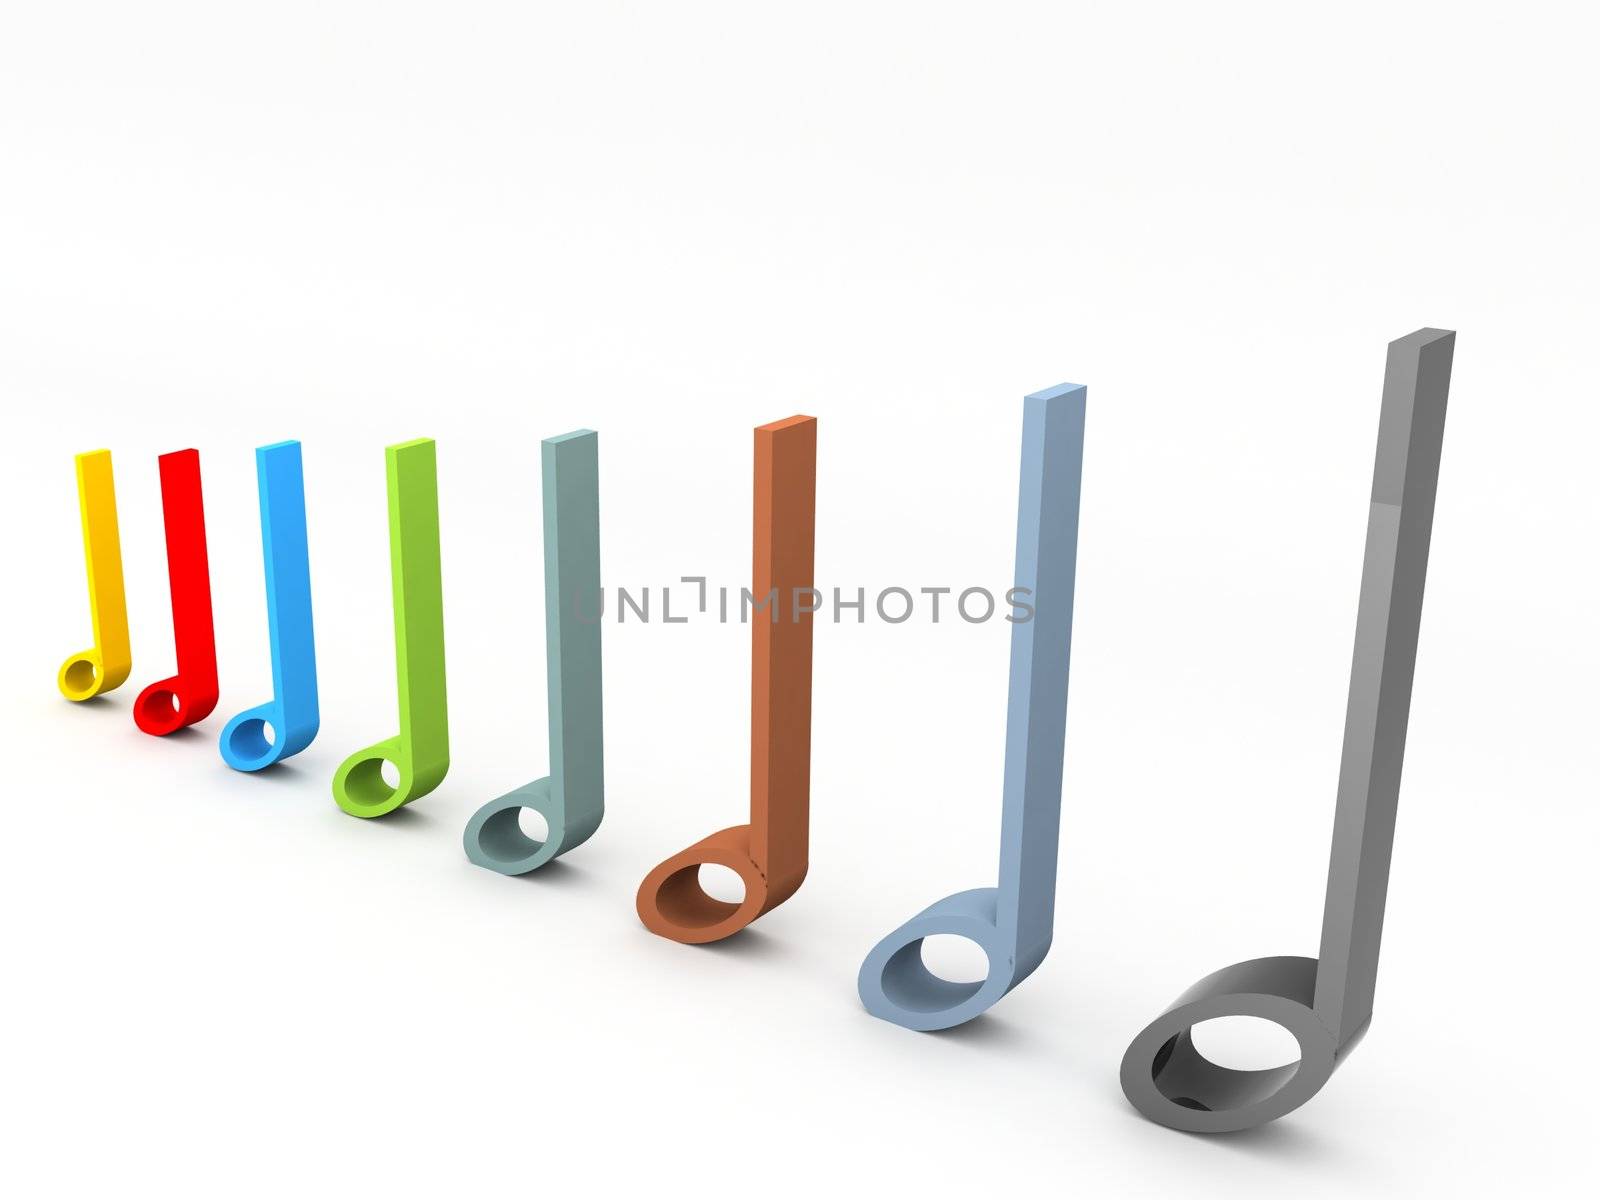 three dimensional musical notes by imagerymajestic